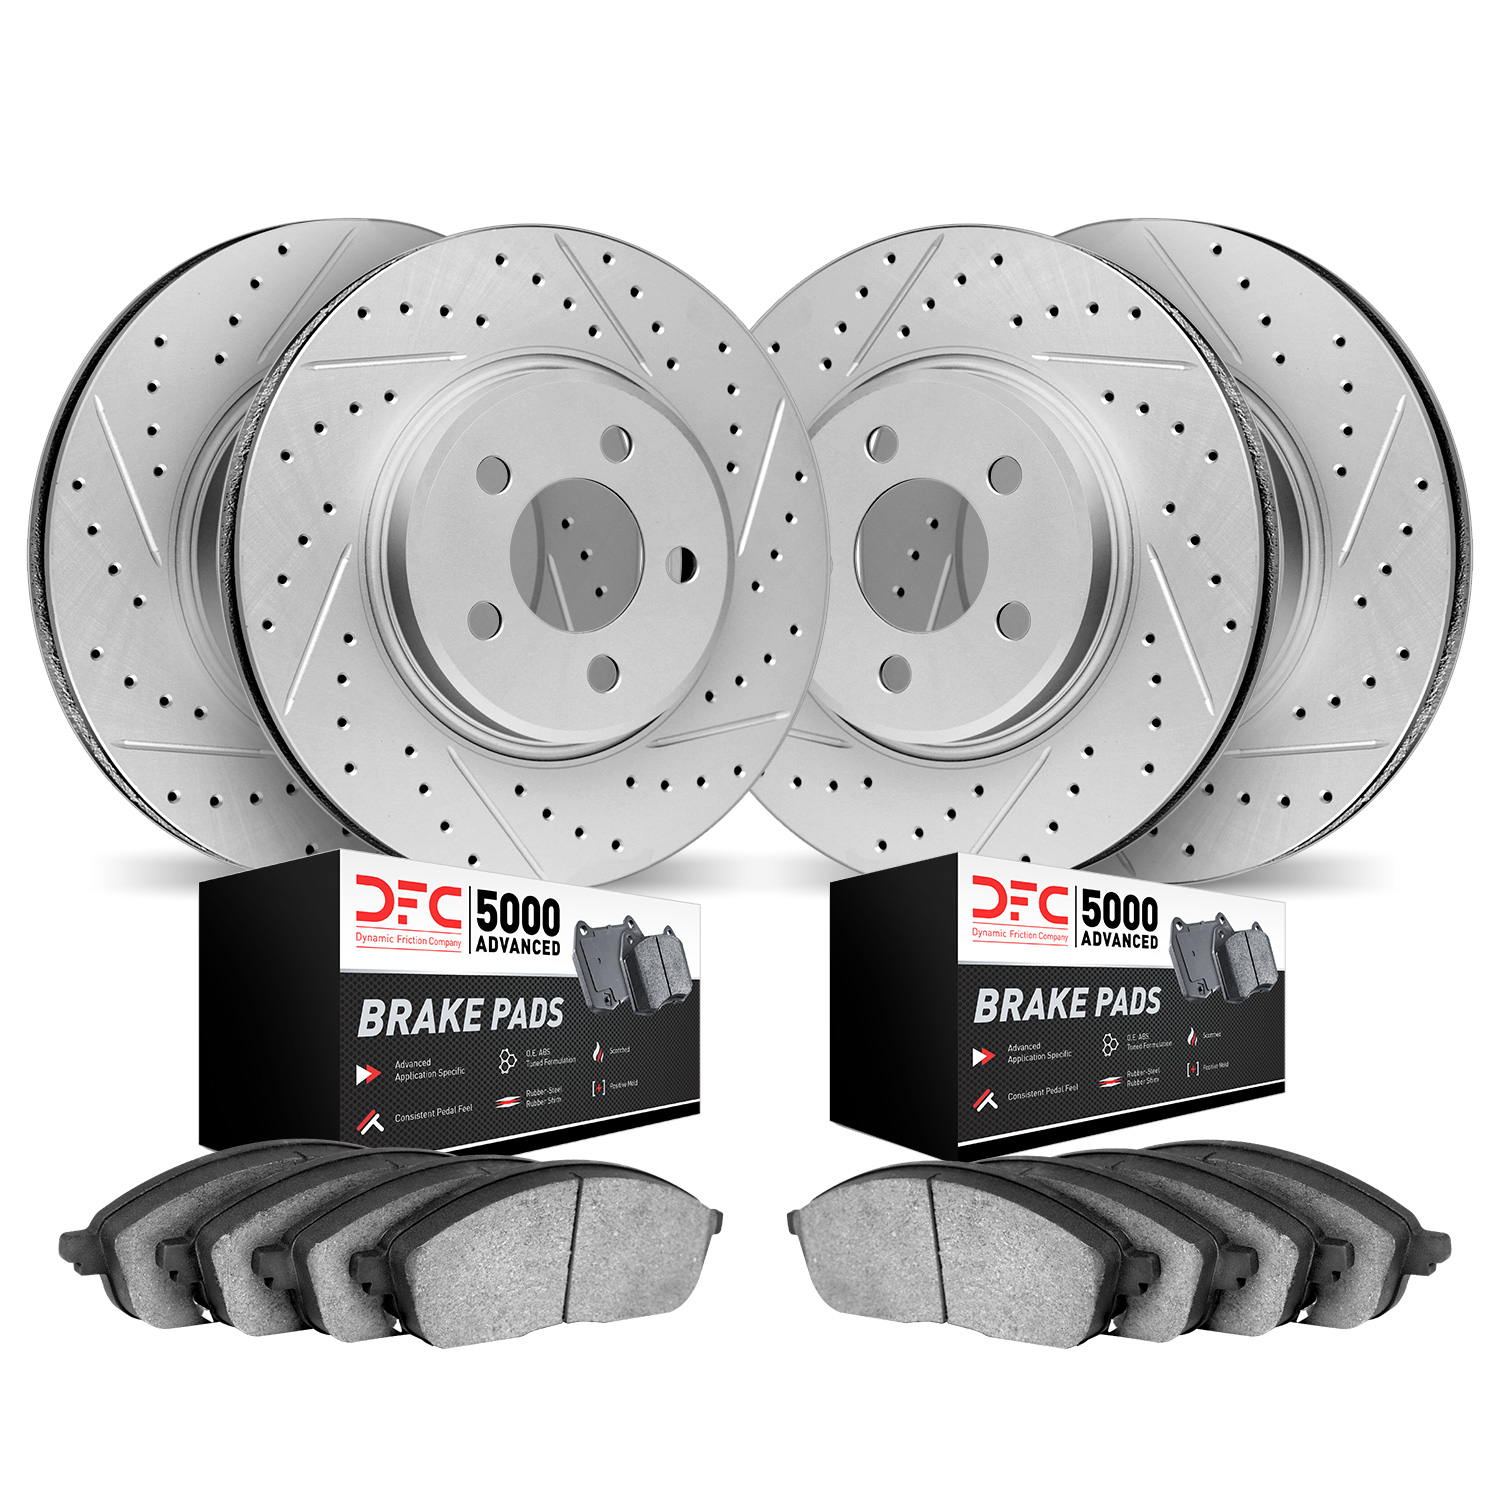 2504-20009 Geoperformance Drilled/Slotted Rotors w/5000 Advanced Brake Pads Kit, 2017-2020 Jaguar, Position: Front and Rear